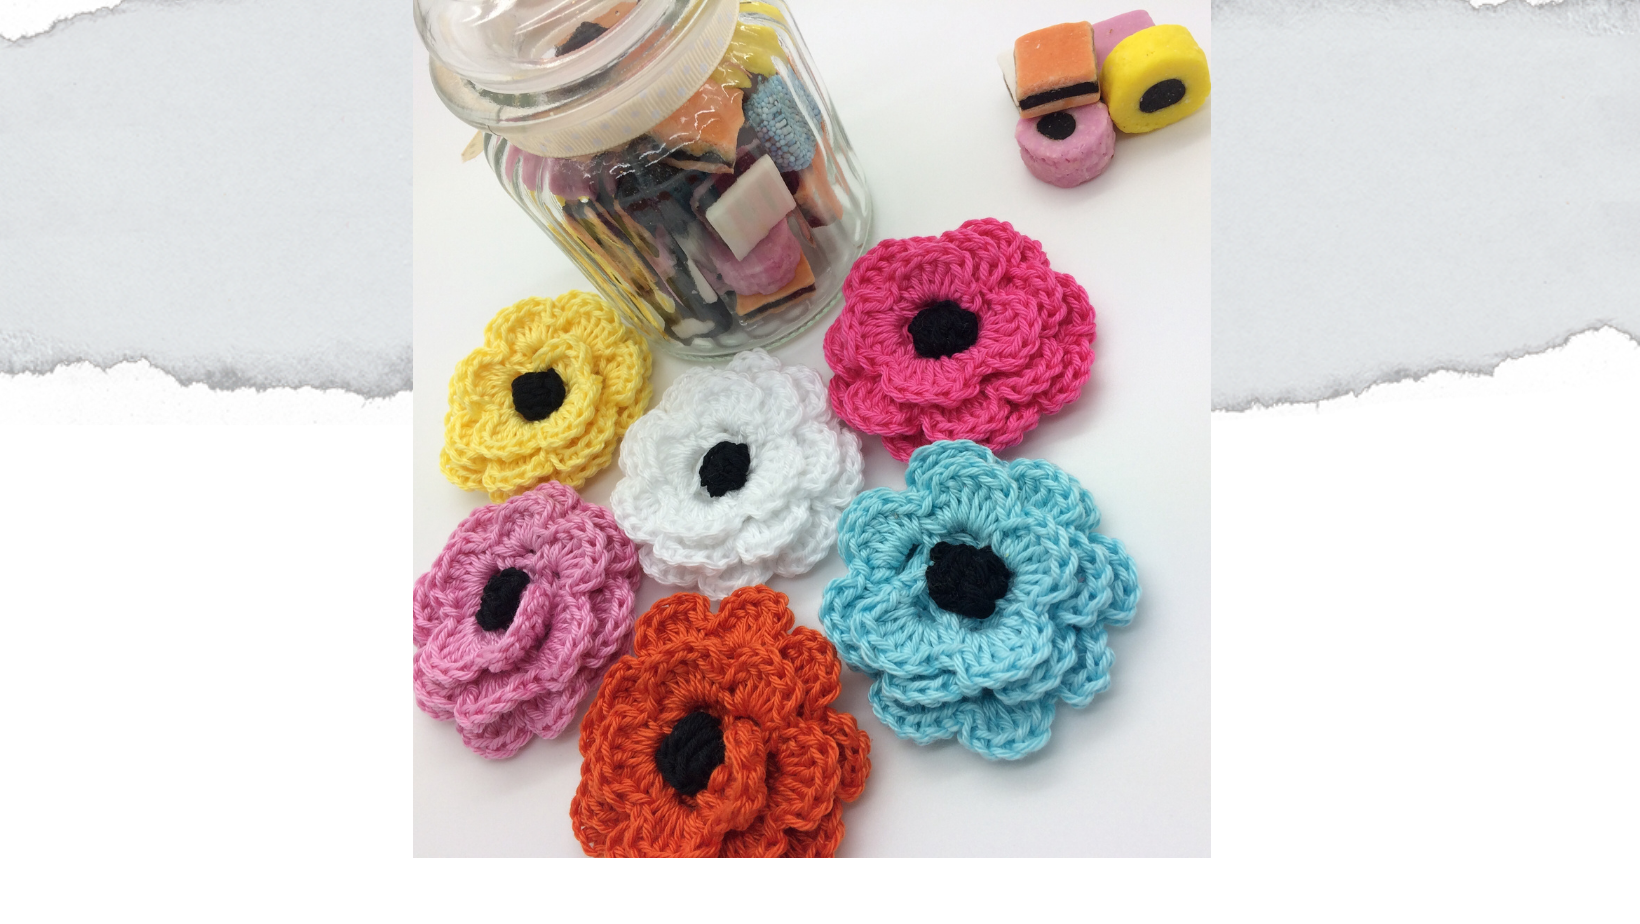 Crochet flower brooch from free flower crochet pattern. Shown in colours of liquorice all sorts with jar of sweets in background